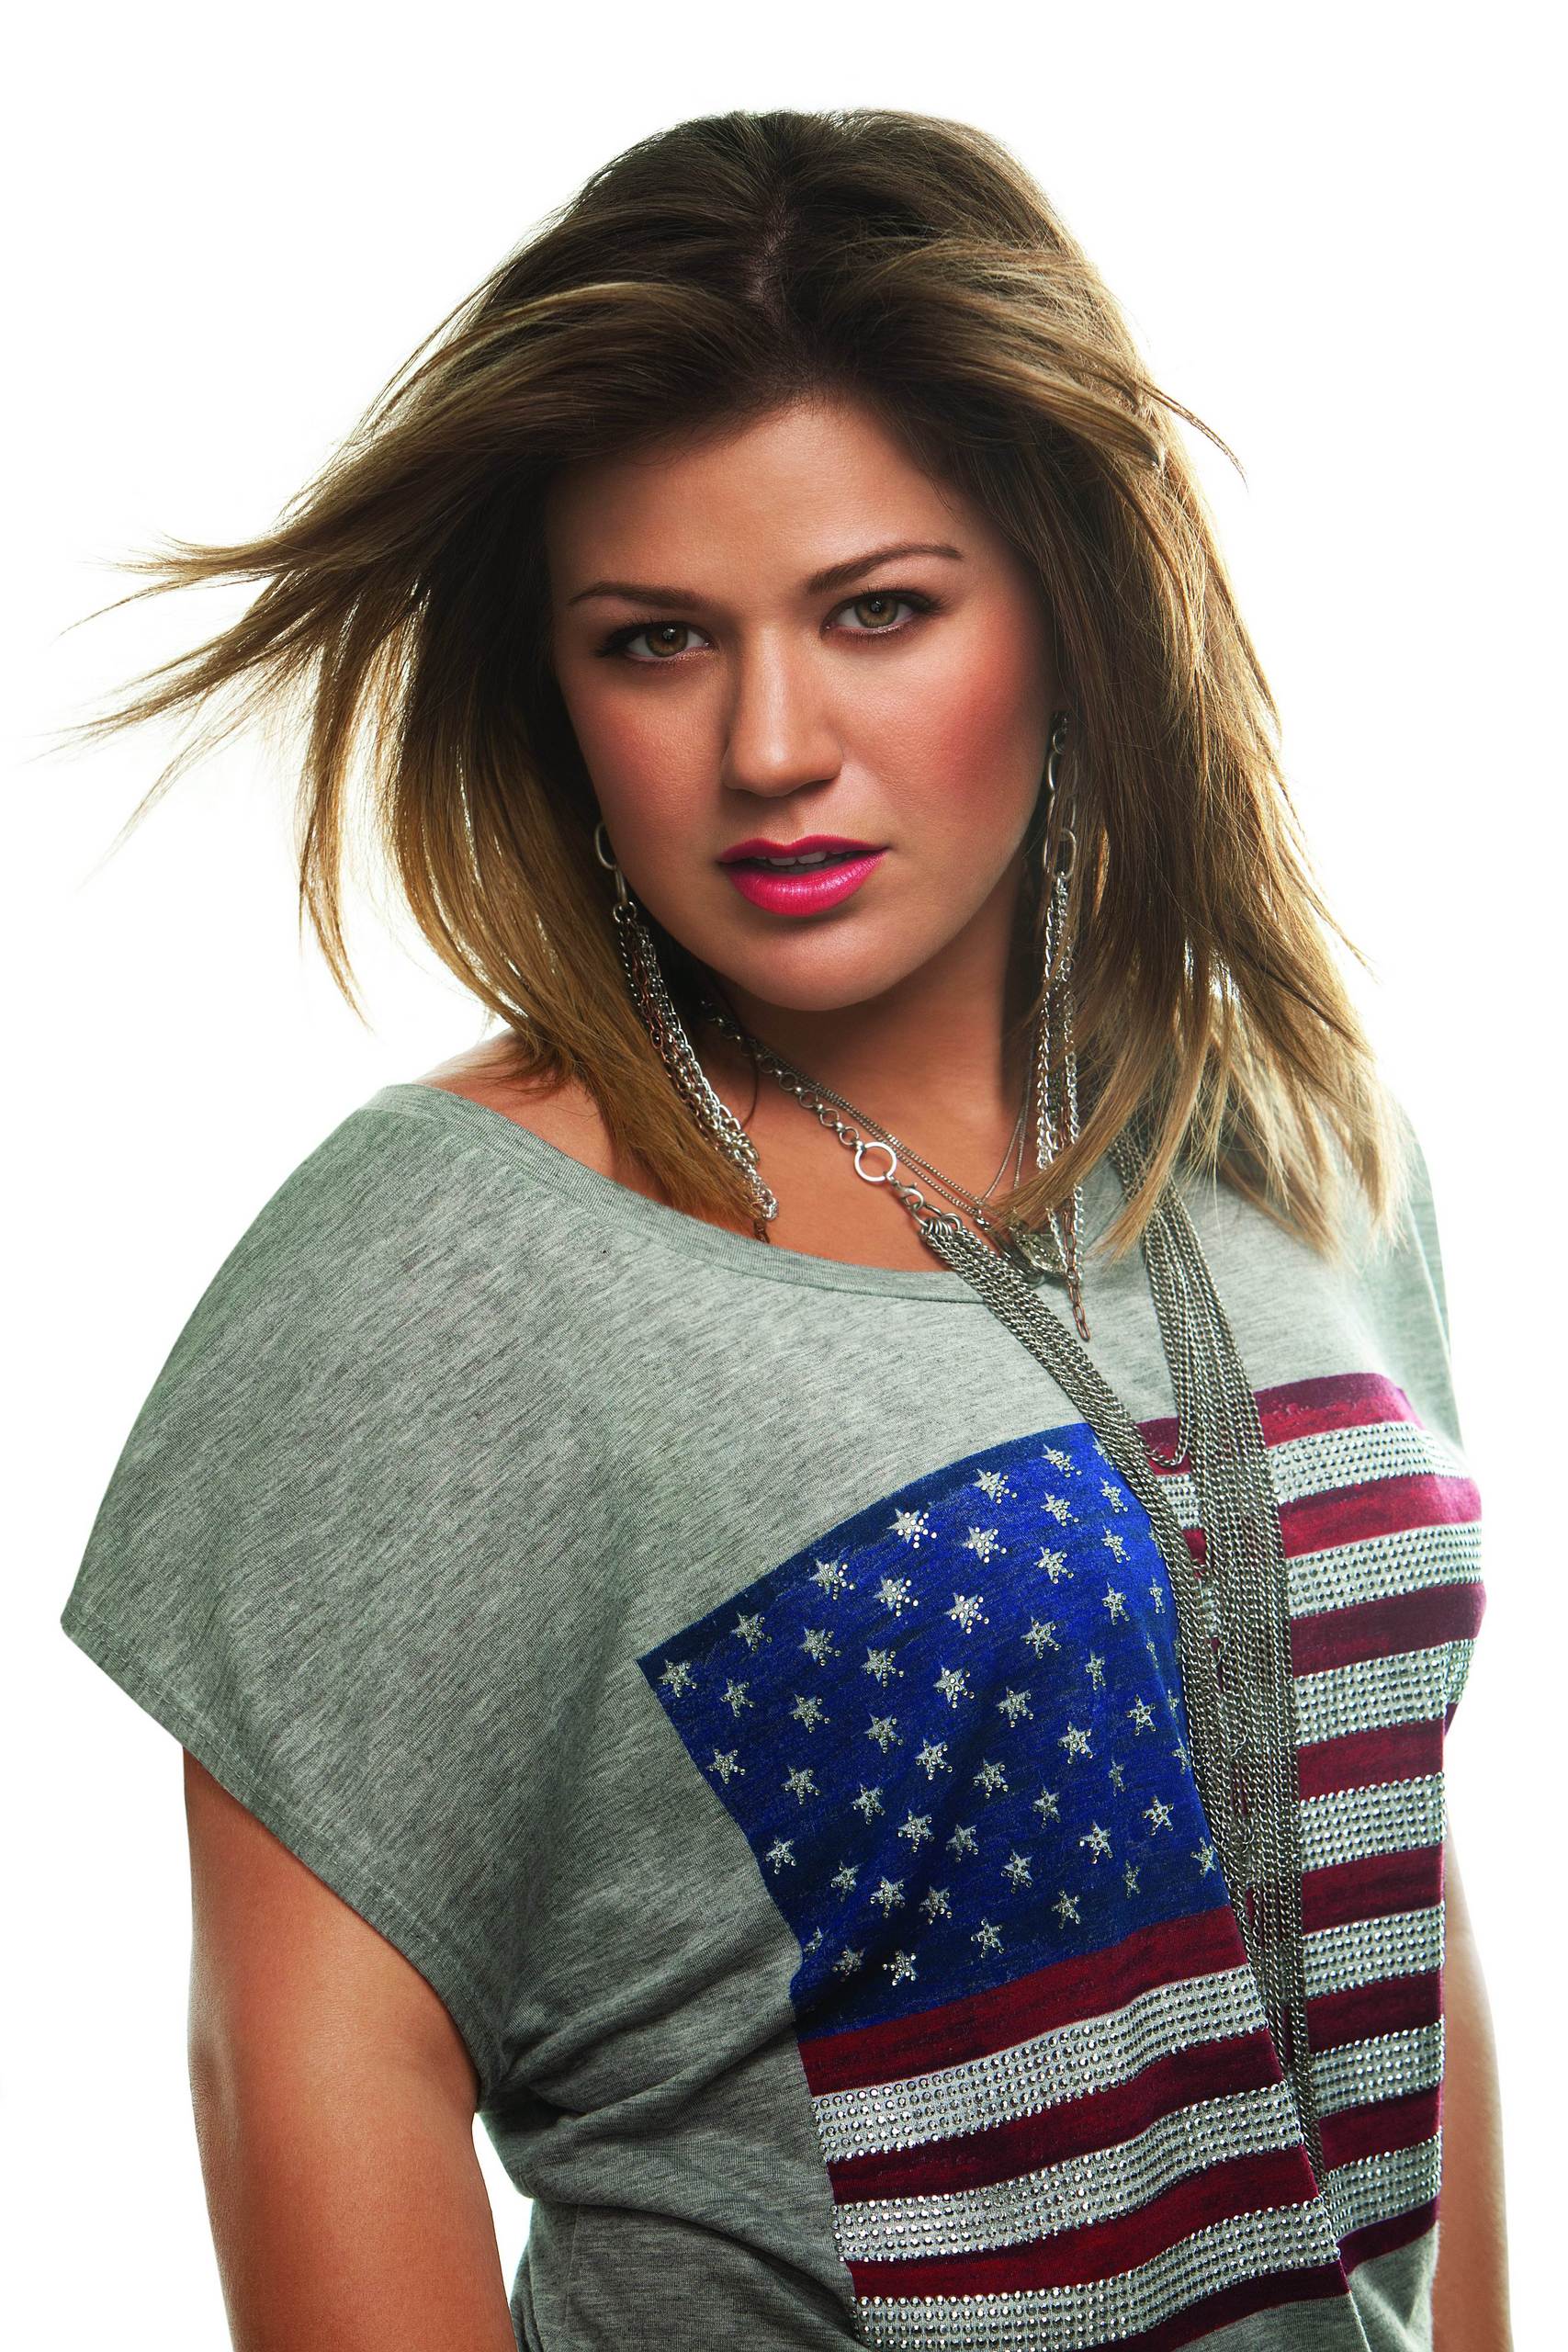 Kelly Clarkson images Kelly Clarkson 5th album photoshoot HD